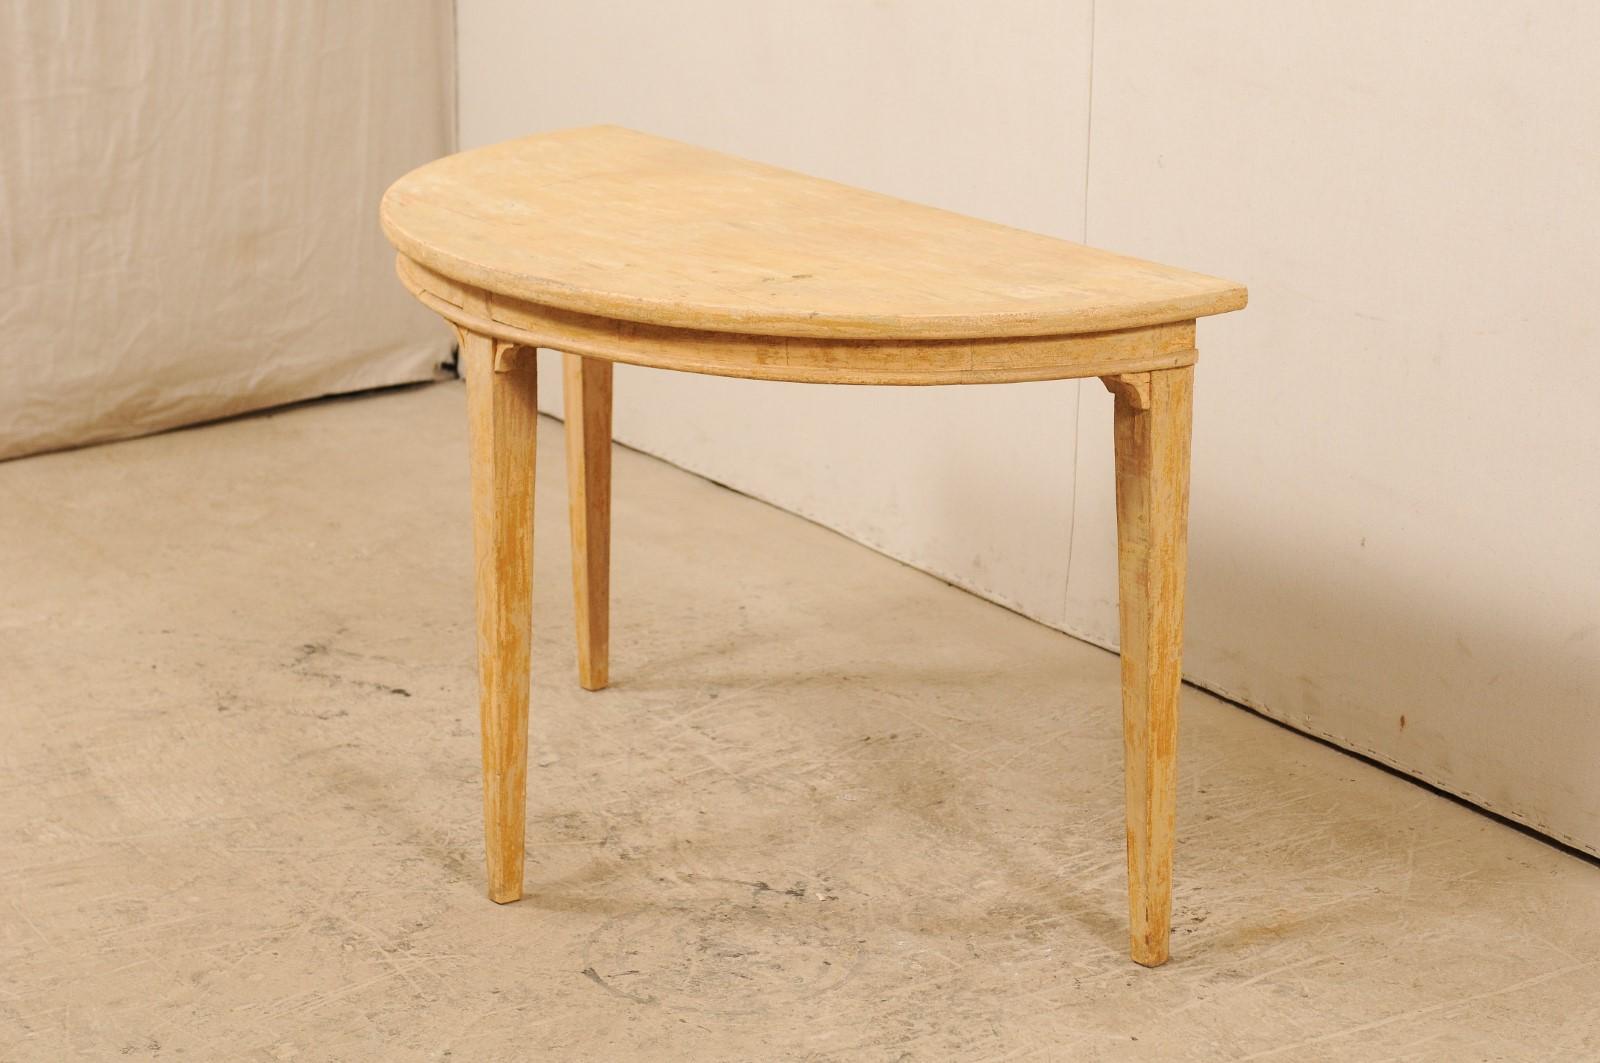 Carved Single Swedish Demilune Light Wood Table from the 19th Century